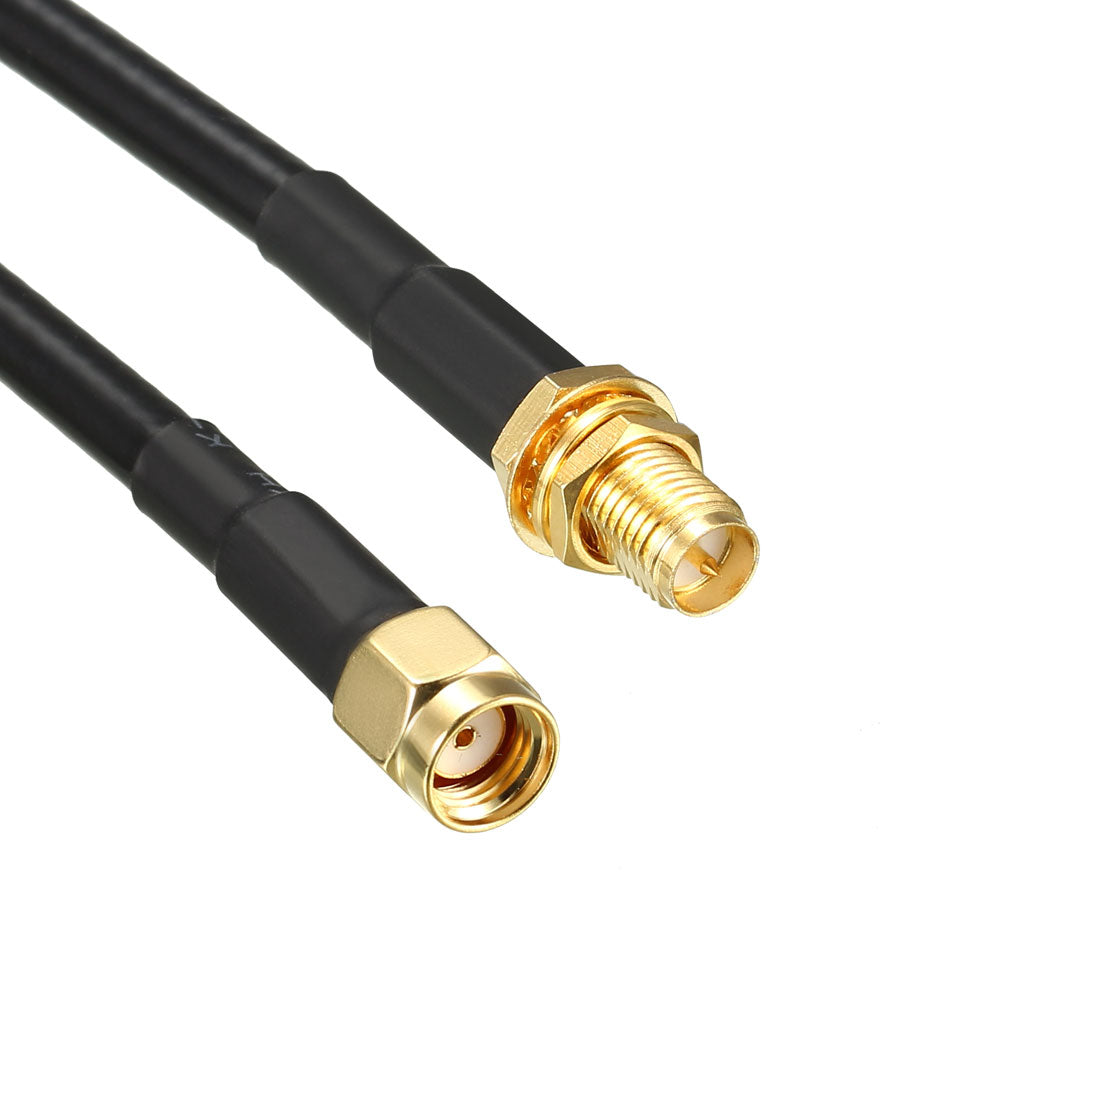 Uxcell Uxcell Antenna Extension Cable RP-SMA Male to RP-SMA Female Coax Cable 26 Ft RG58